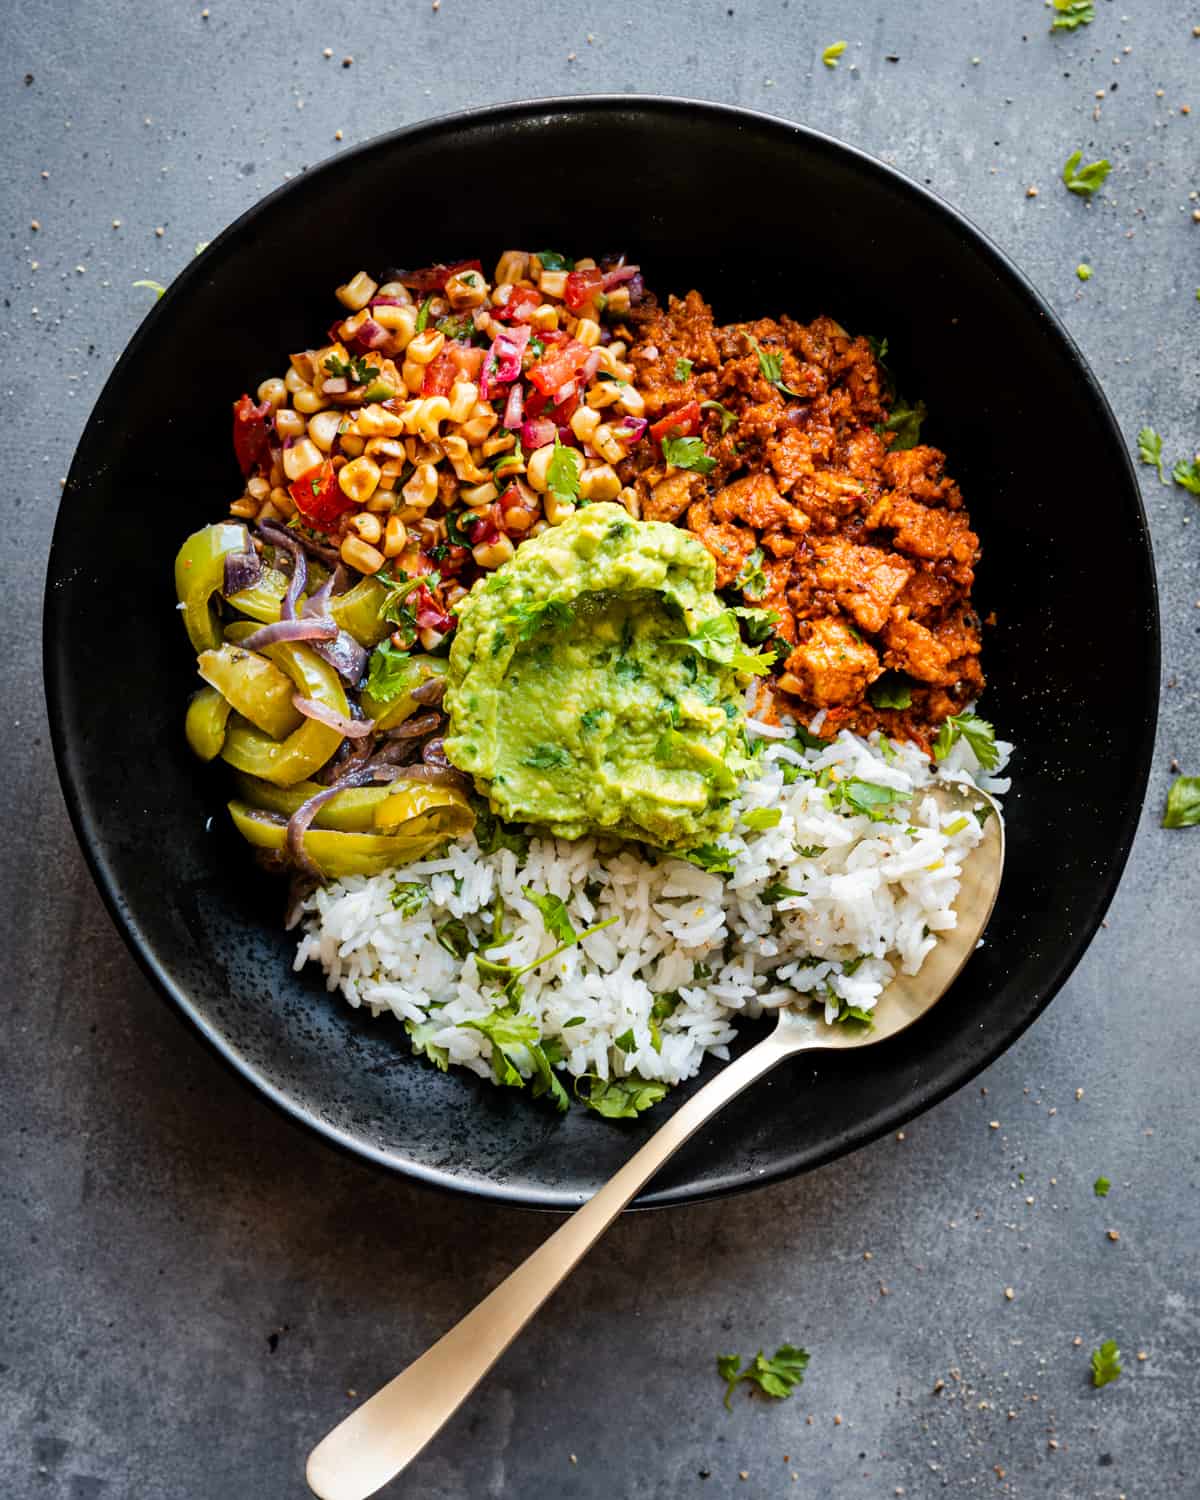 Burrito bowl components together in black bowl with a spoon.